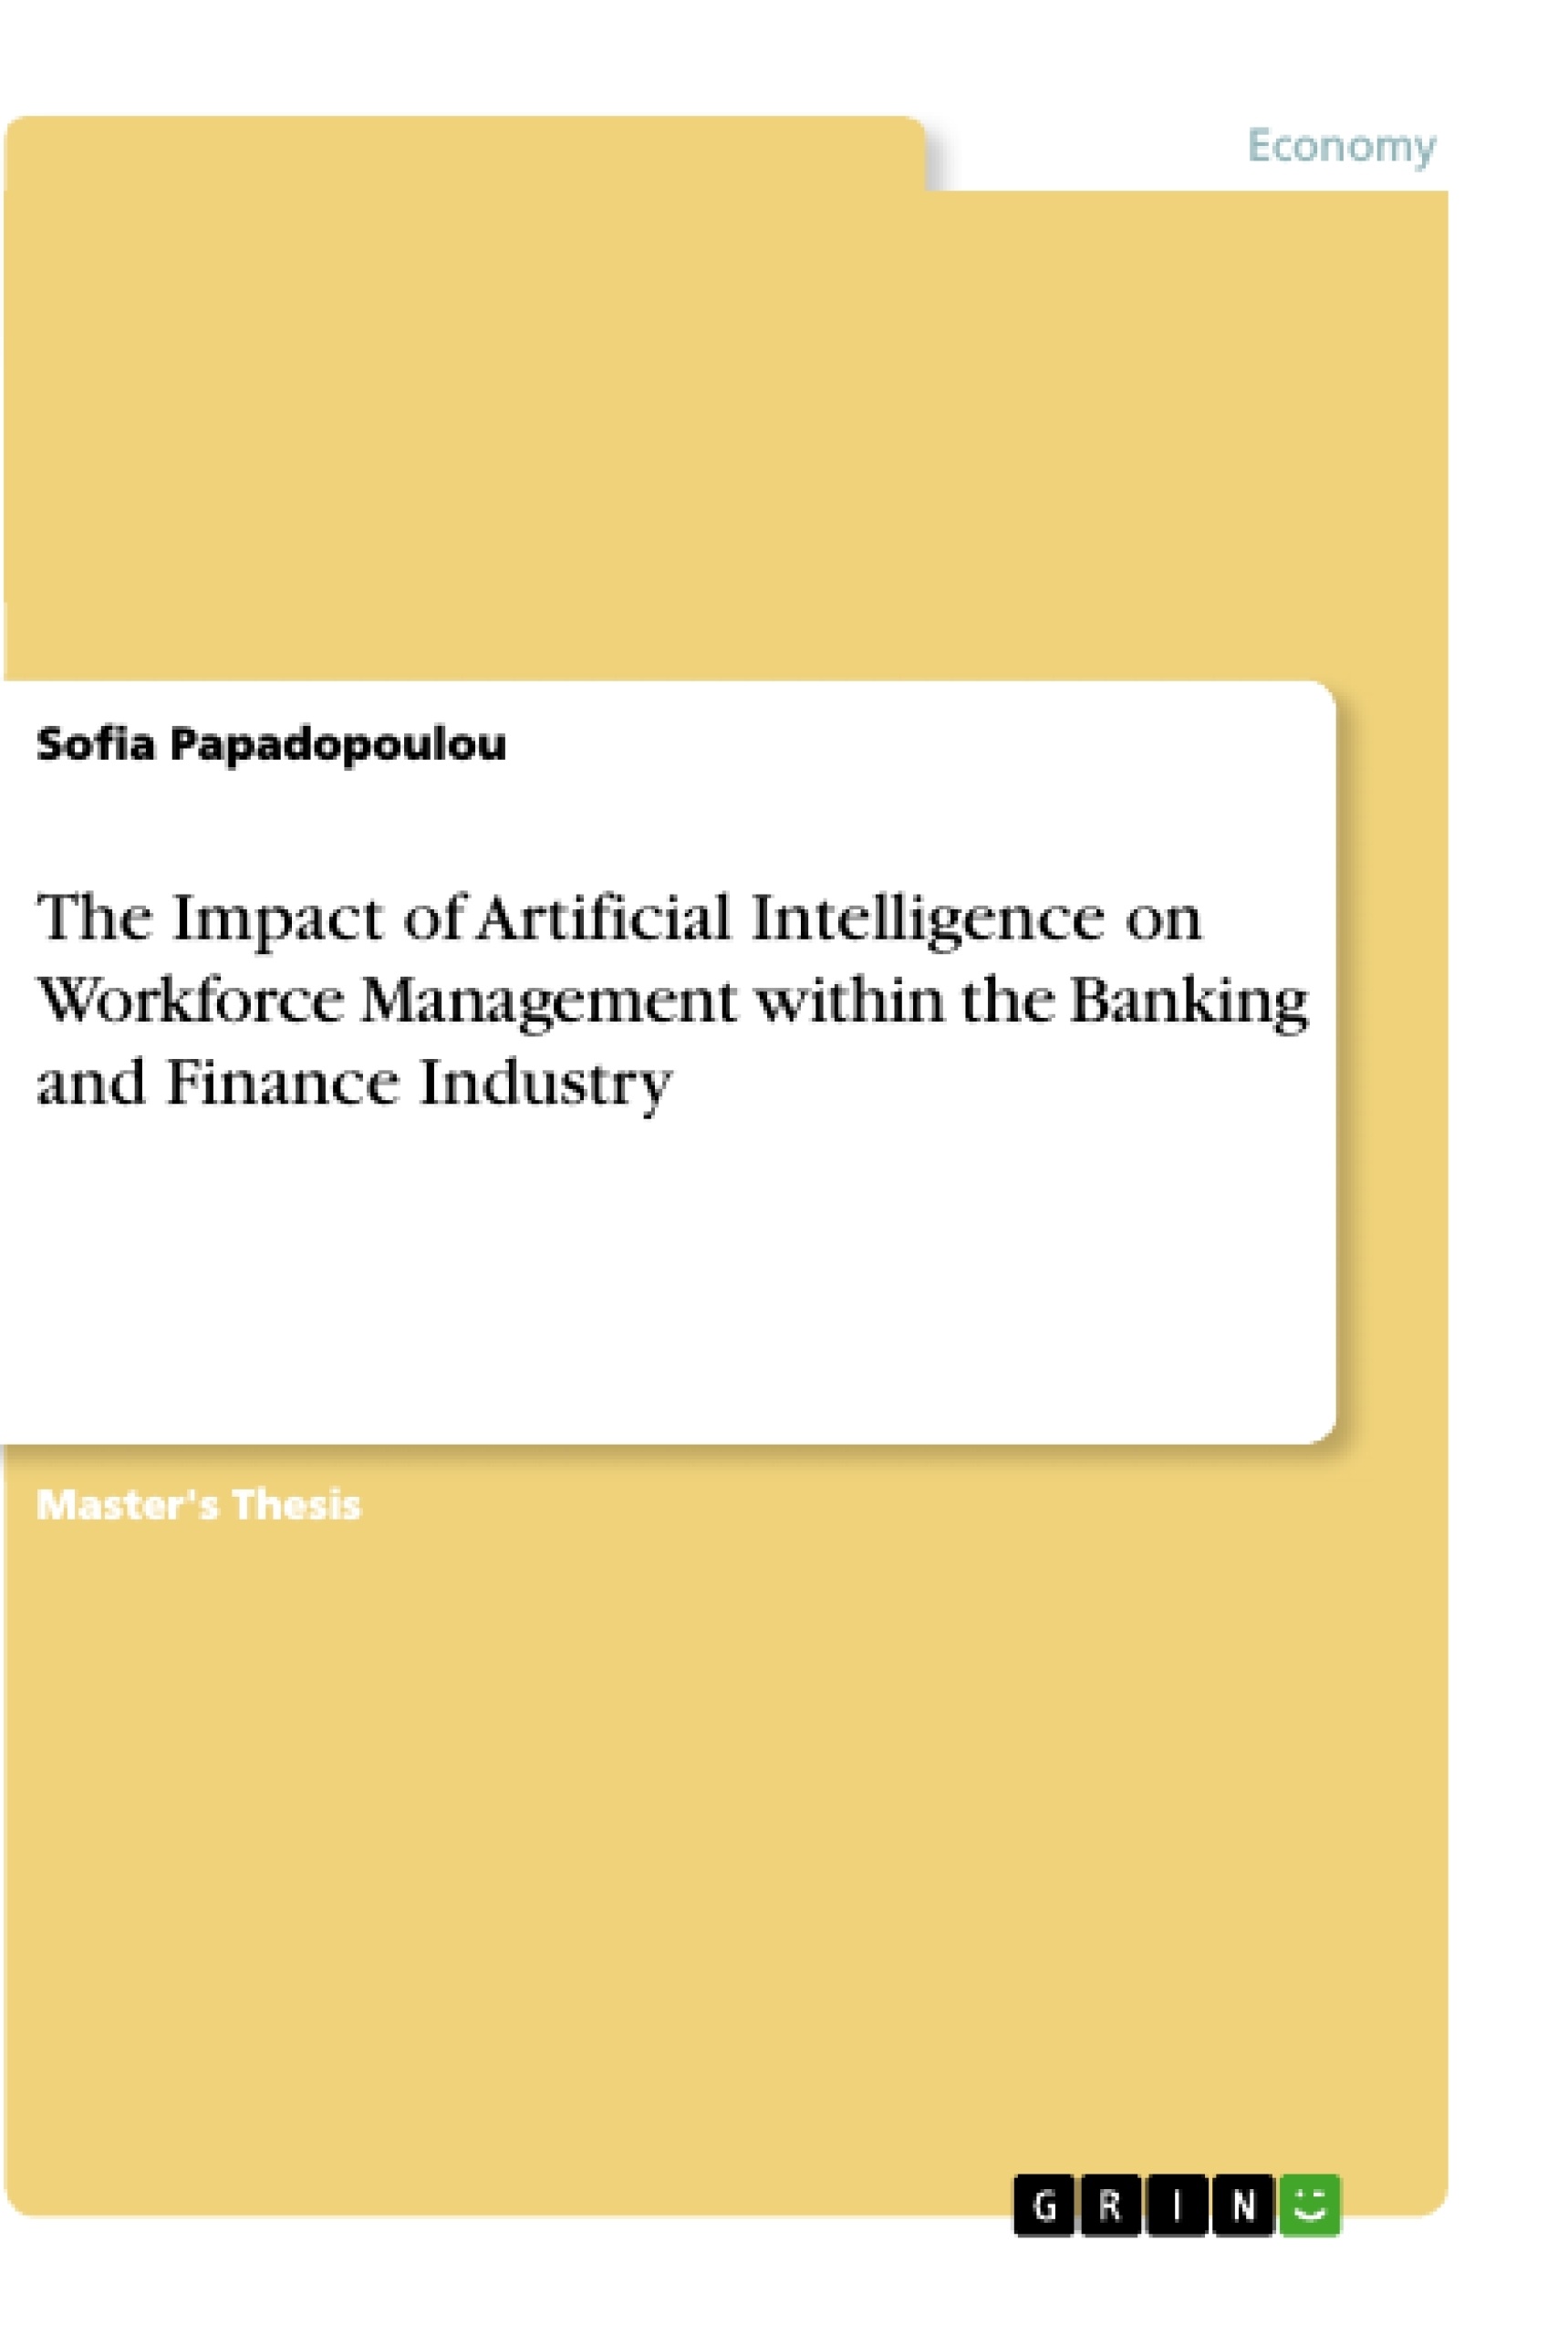 Title: The Impact of Artificial Intelligence on Workforce Management within the Banking and Finance Industry